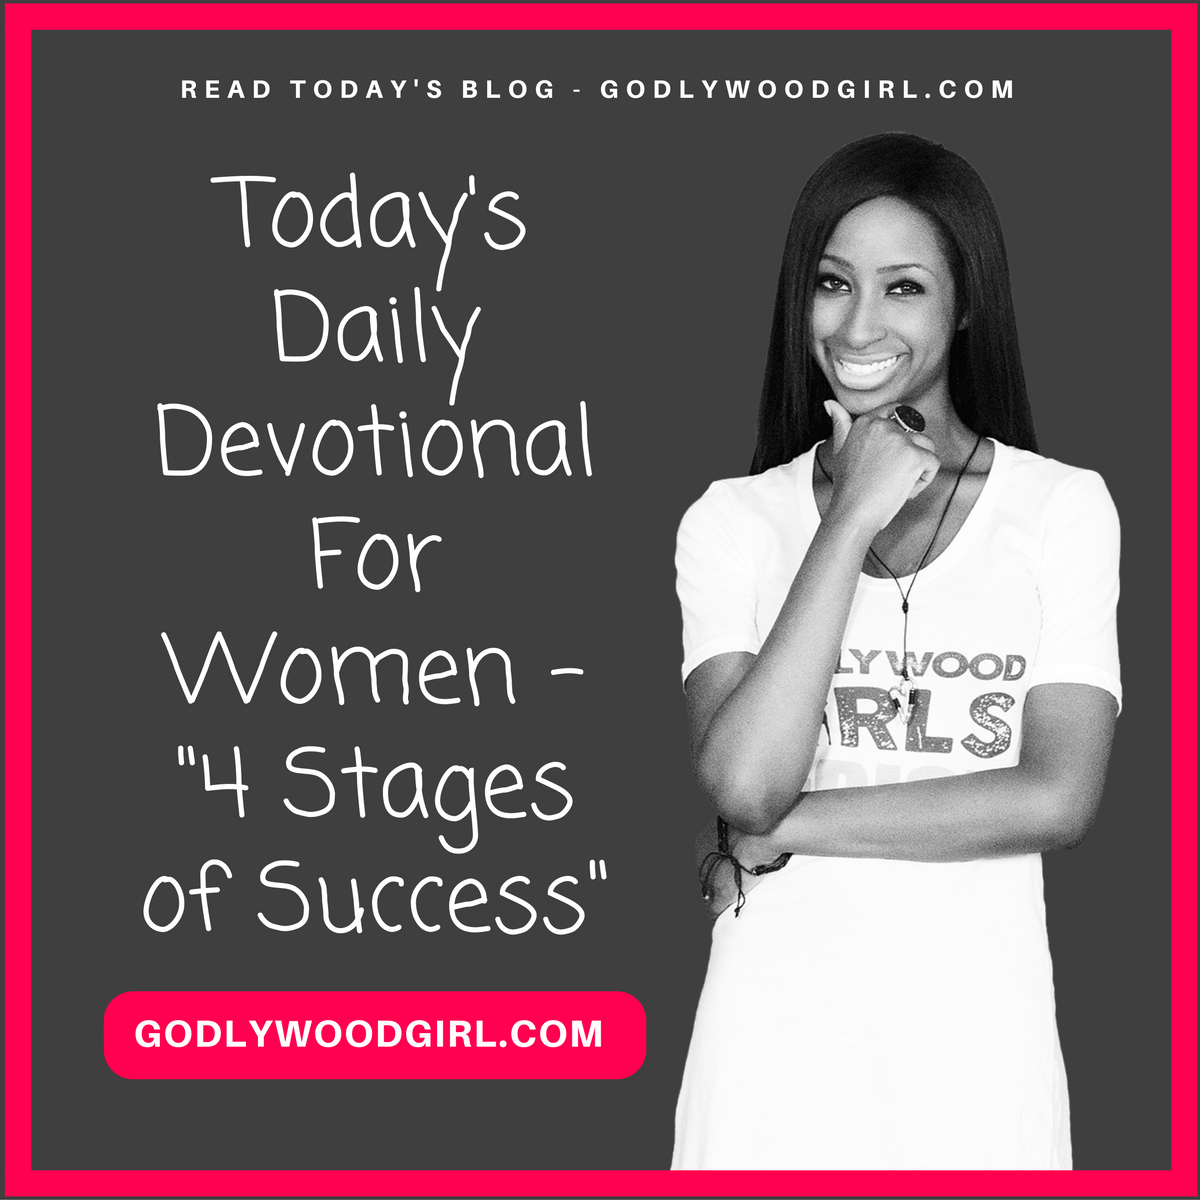 Today's Daily Devotional for Women - 4 Stages of Success